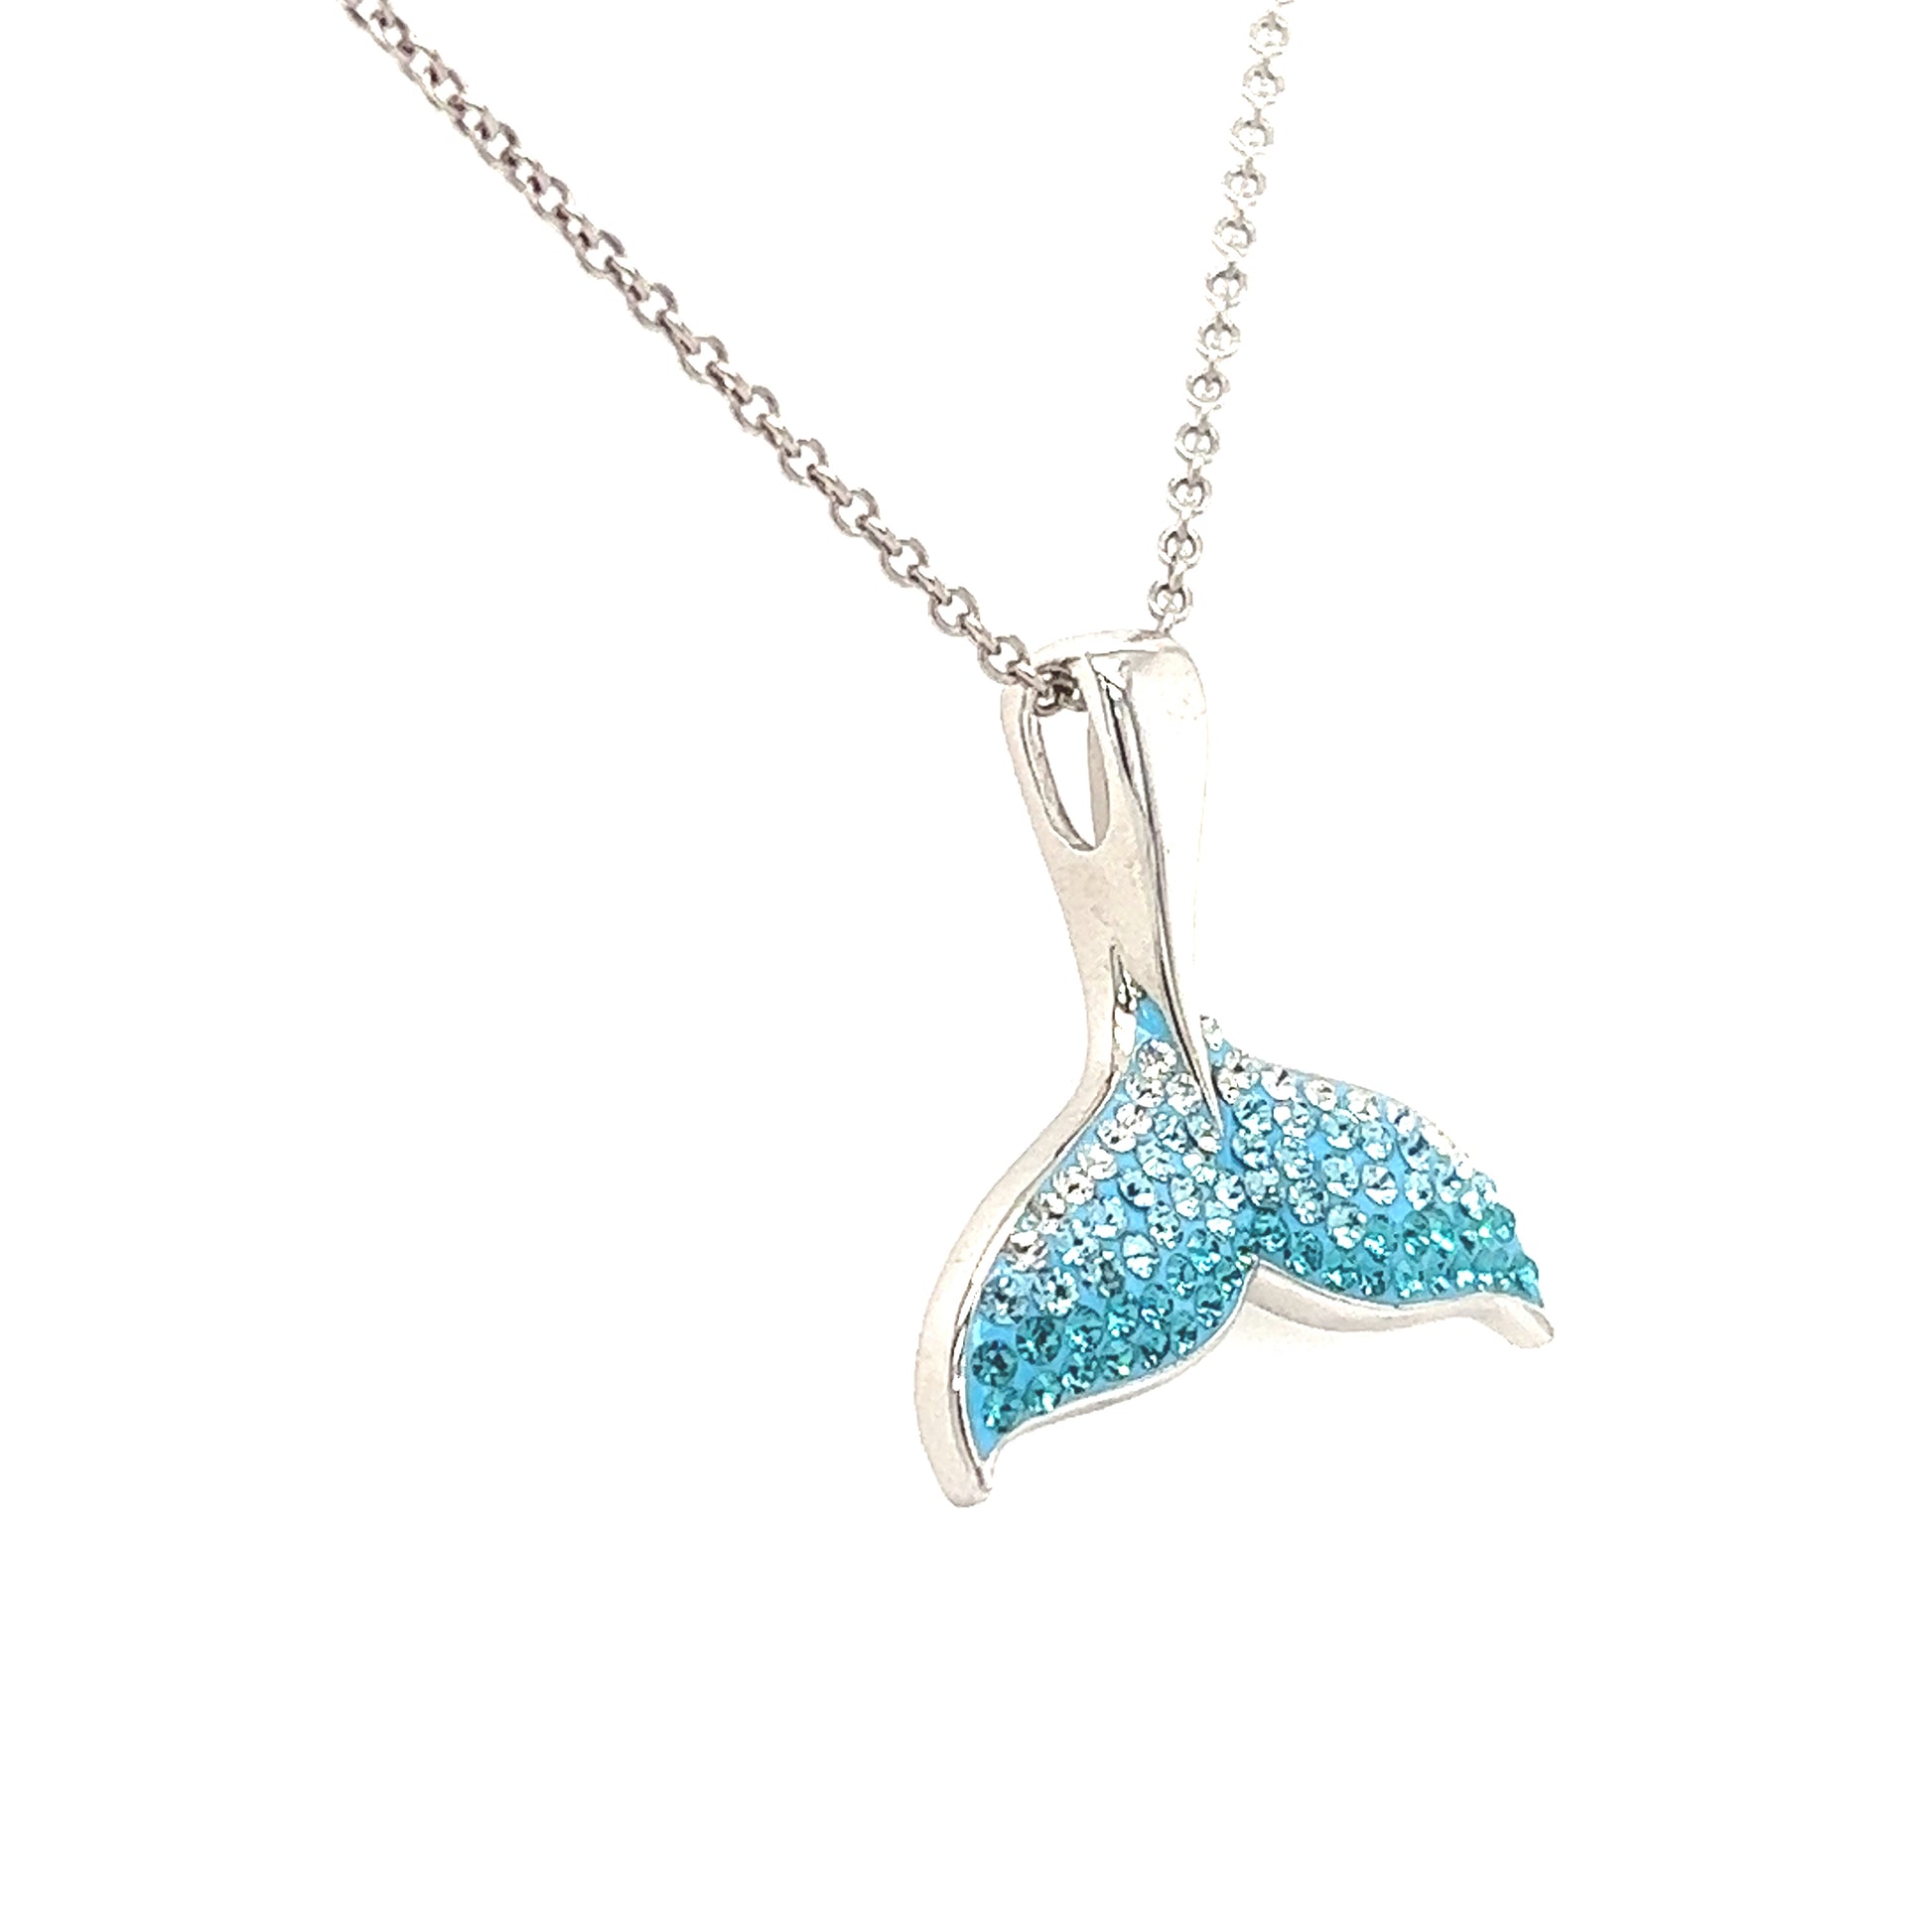 Whale Tail Necklace with Aqua Crystals in Sterling Silver Right Side View